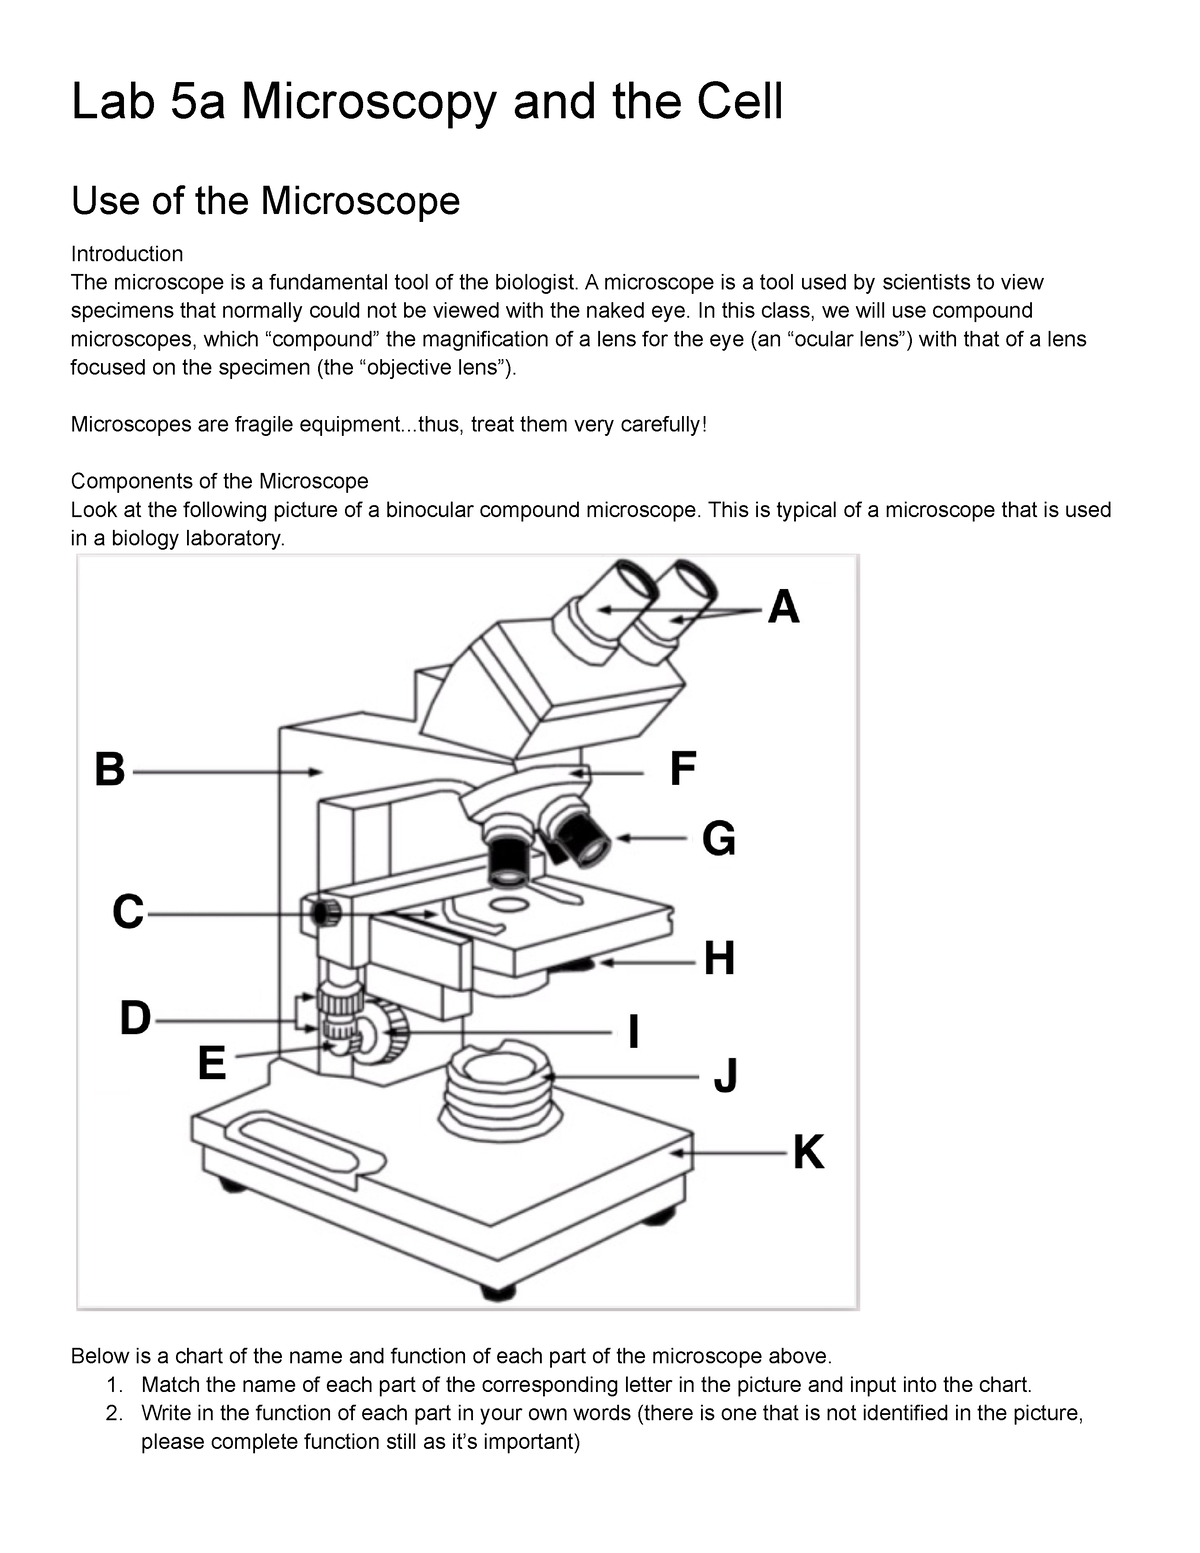 Lab 5a Microscopy and the Cell - A microscope is a tool used by ...